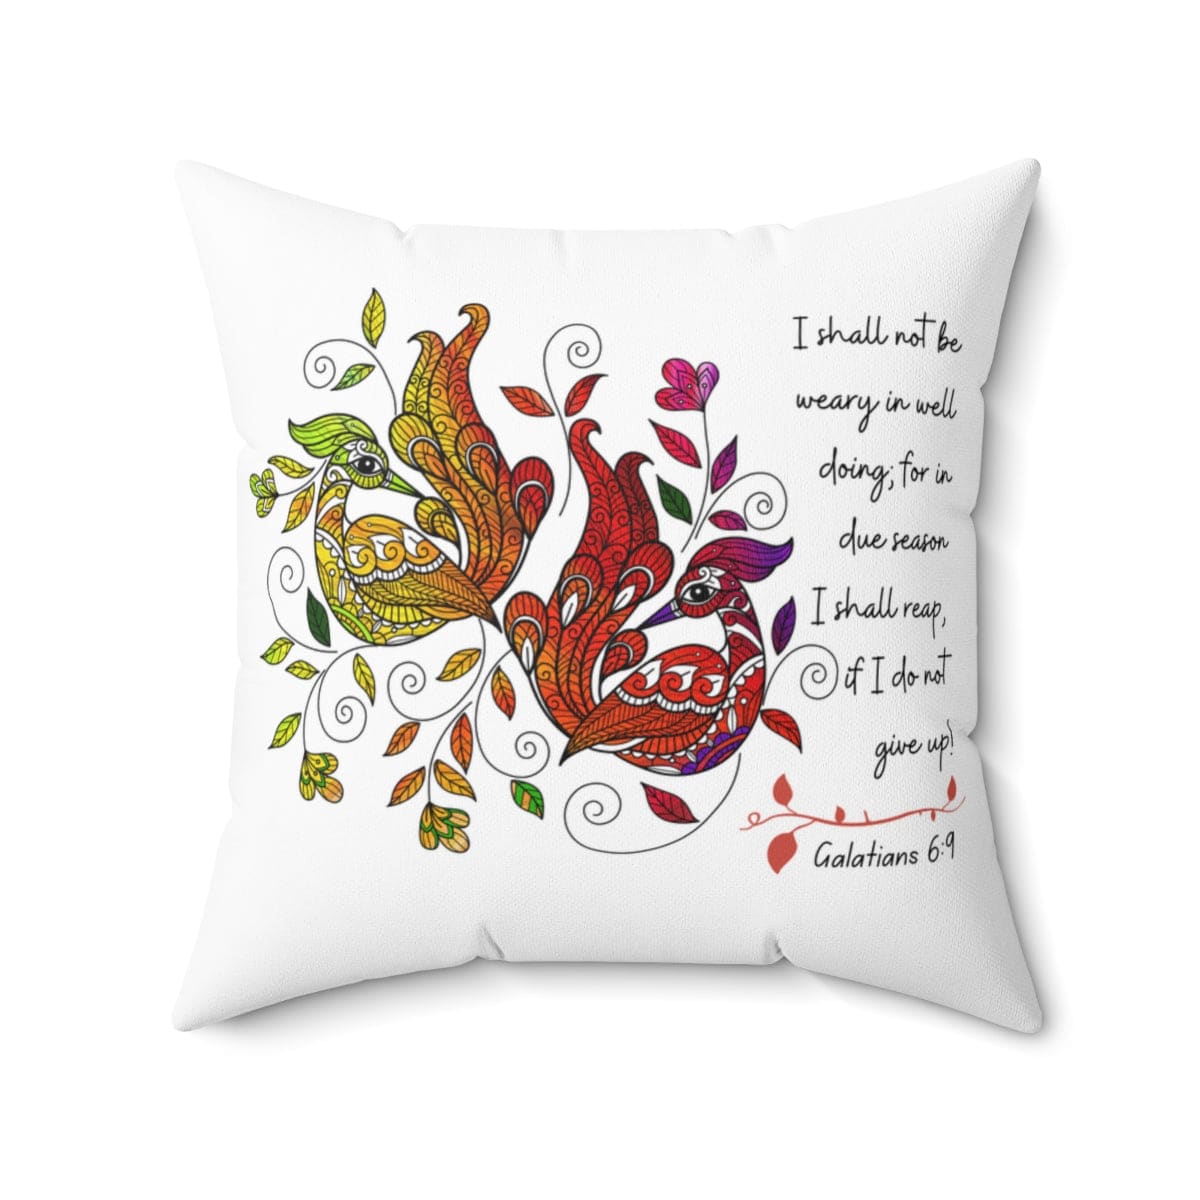 Decorative Throw Pillow Cover Colorful Peacock Print Affirmation - i Shall Not